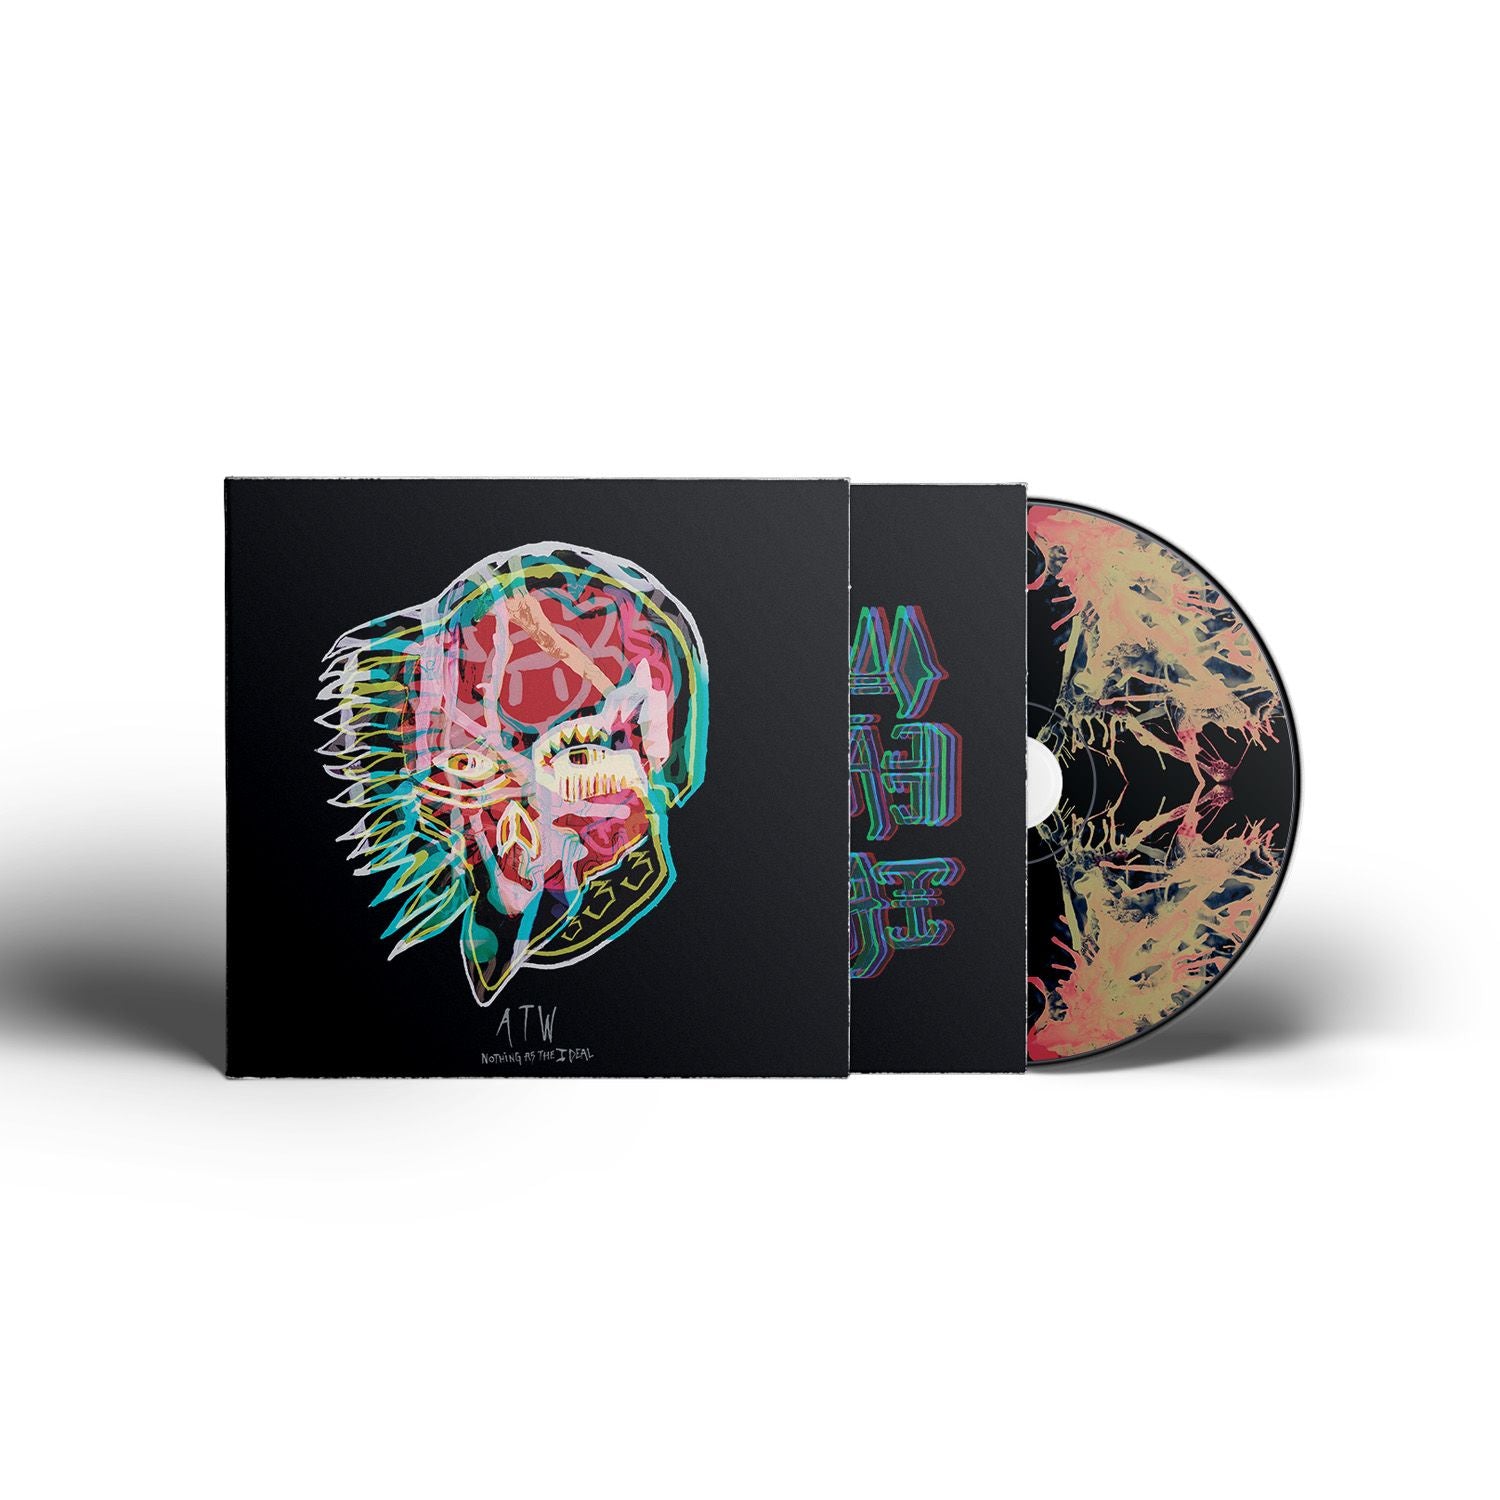 All Them Witches - Nothing as the Ideal [CD]